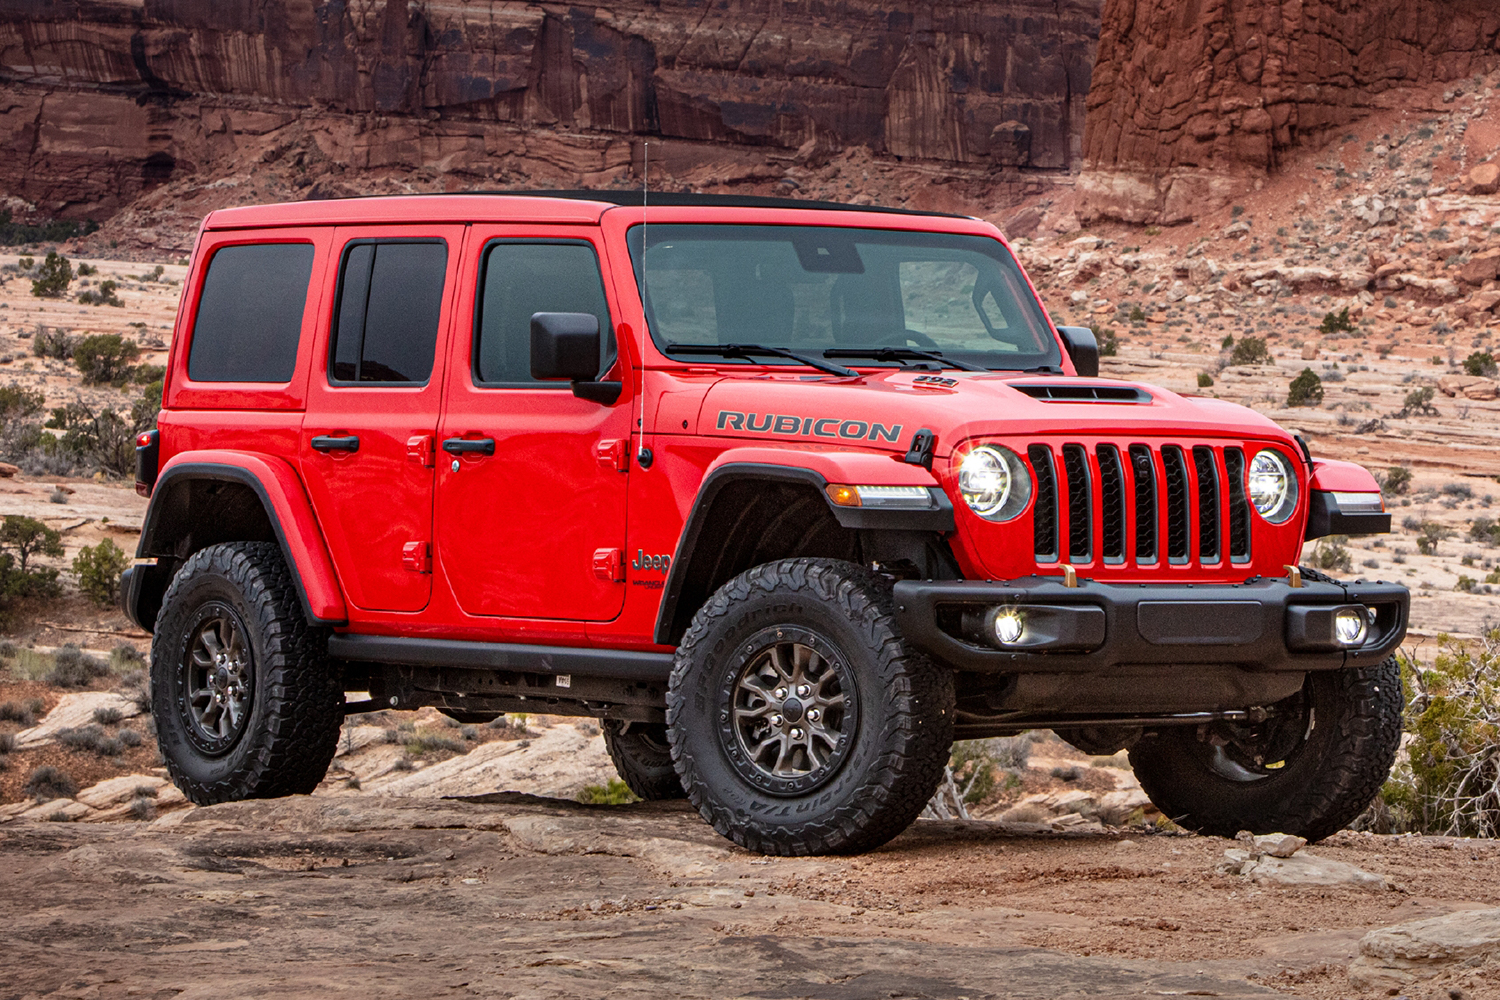 A red Jeep Wrangler Rubicon 392, an off-road SUV with a V8 engine, sits in a canyon